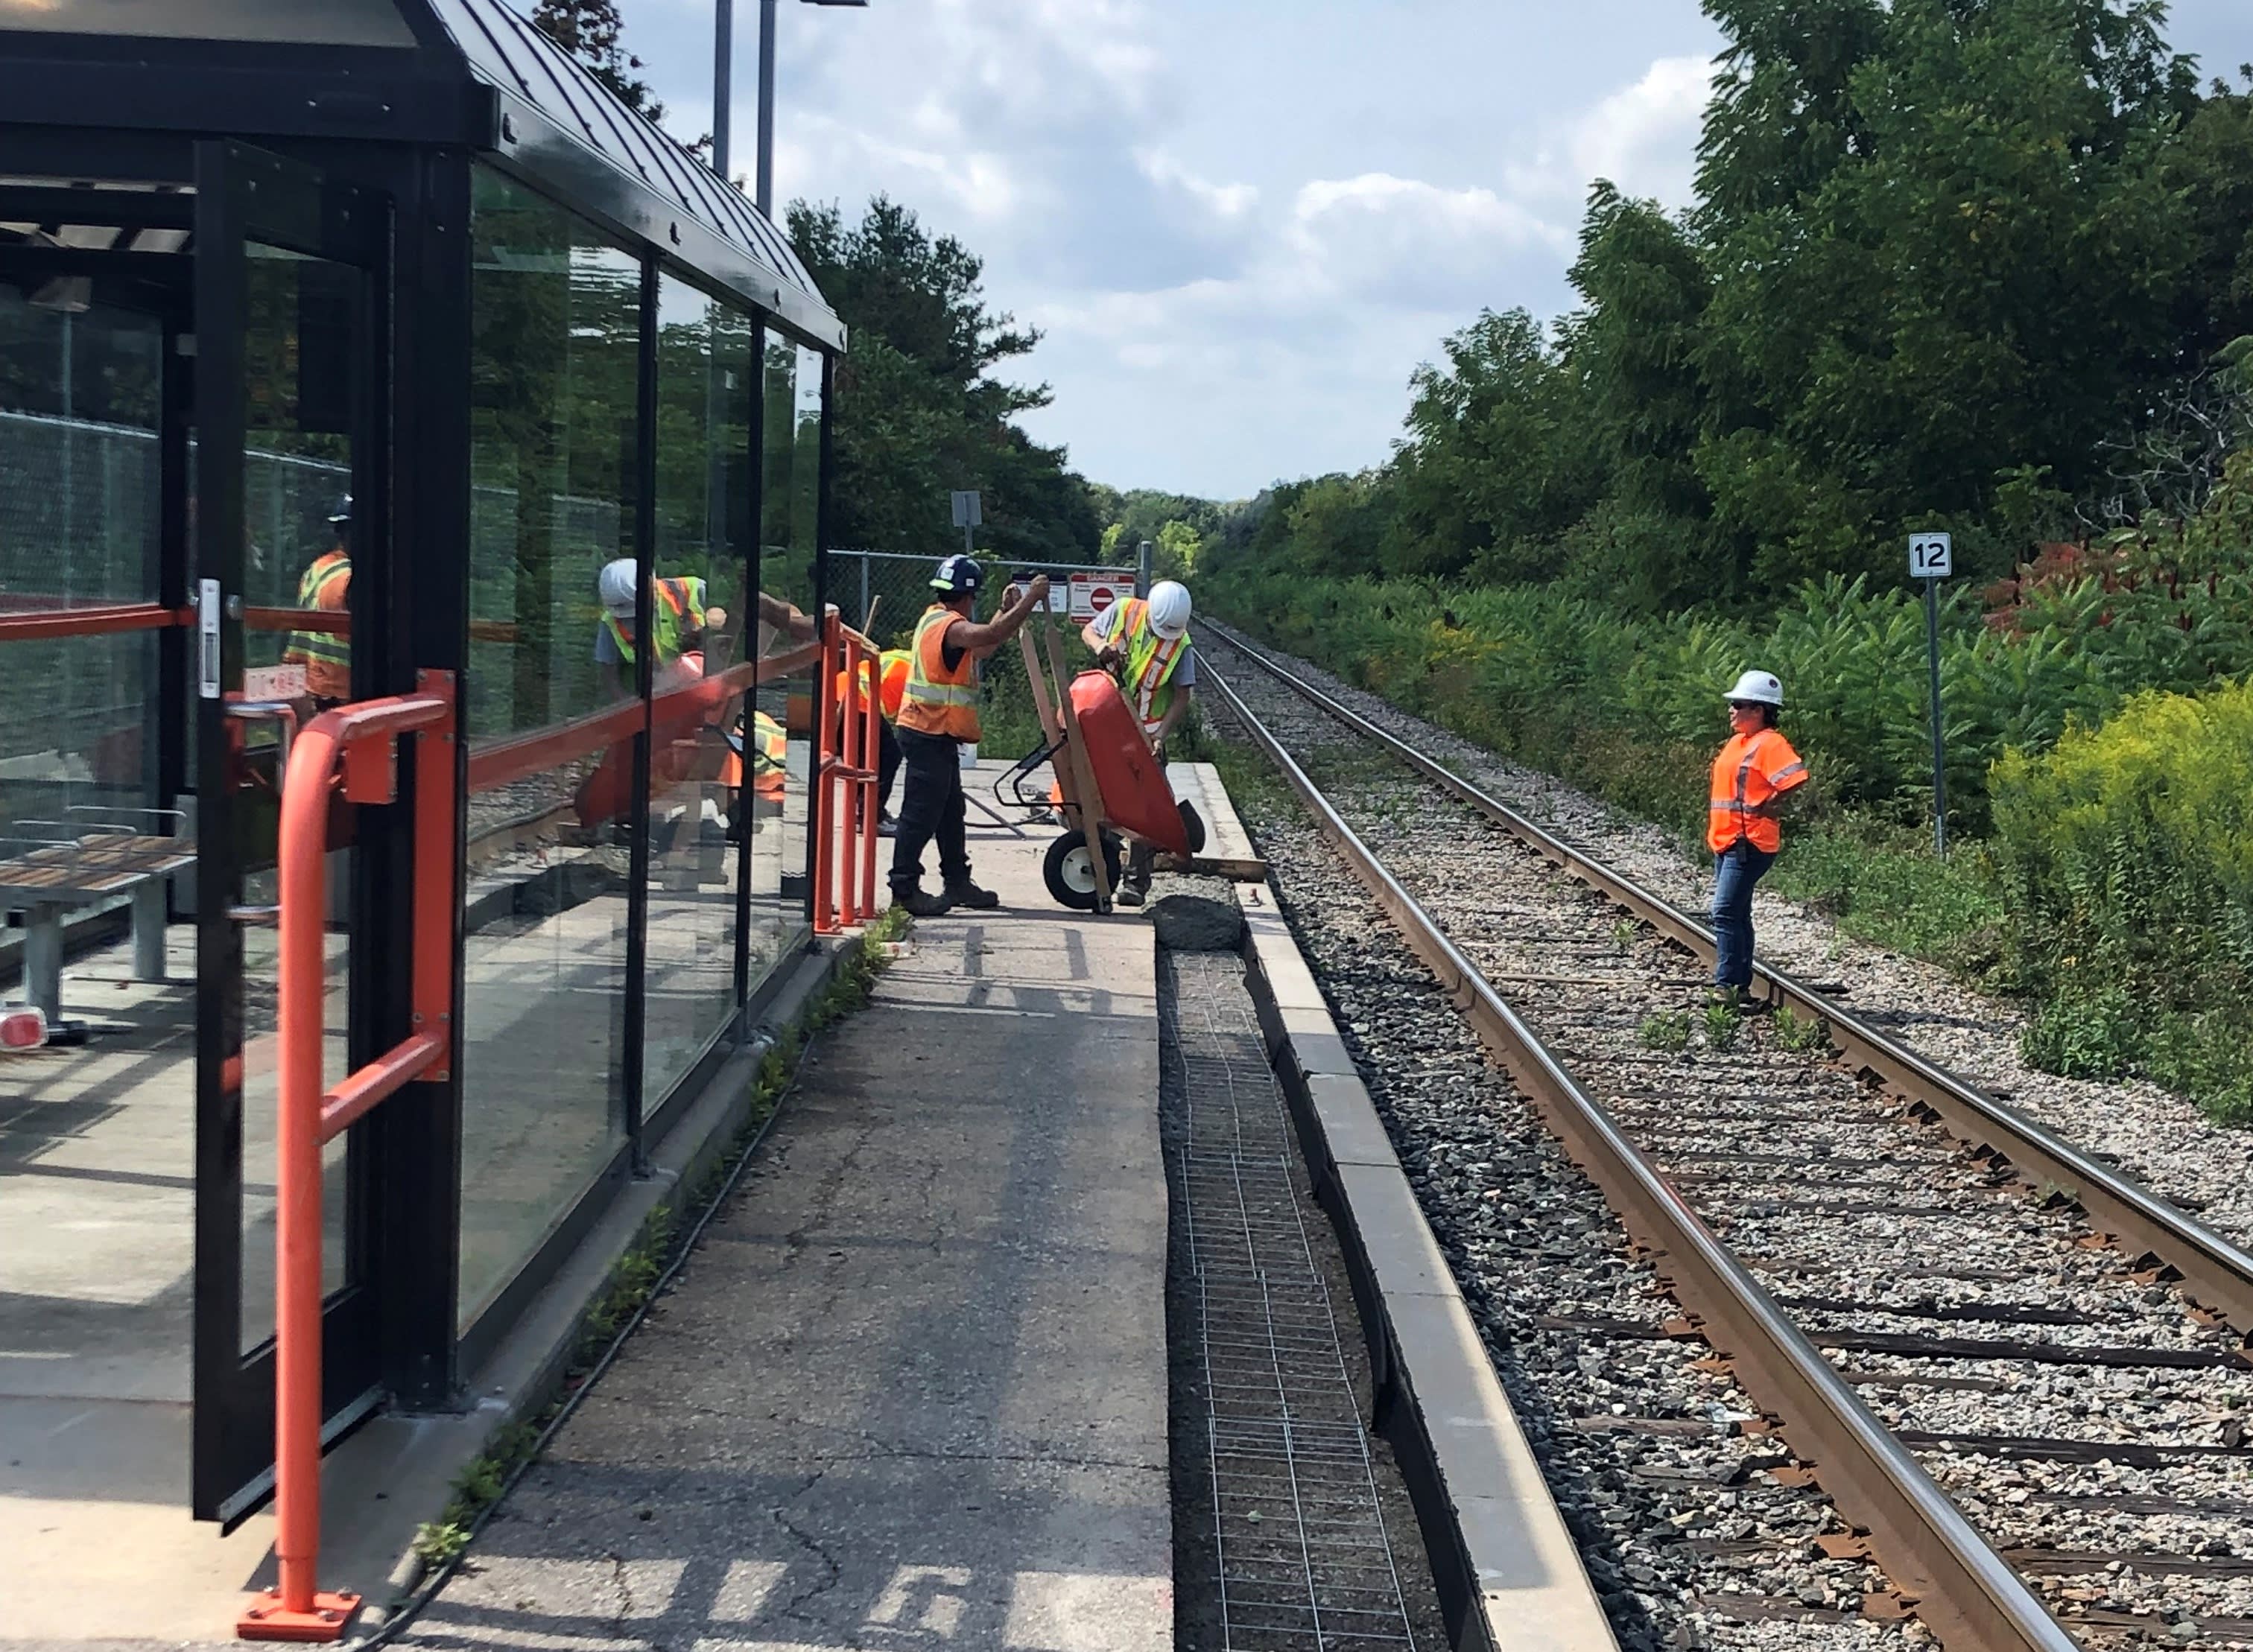 Crews are seen working on the edge of a platform.